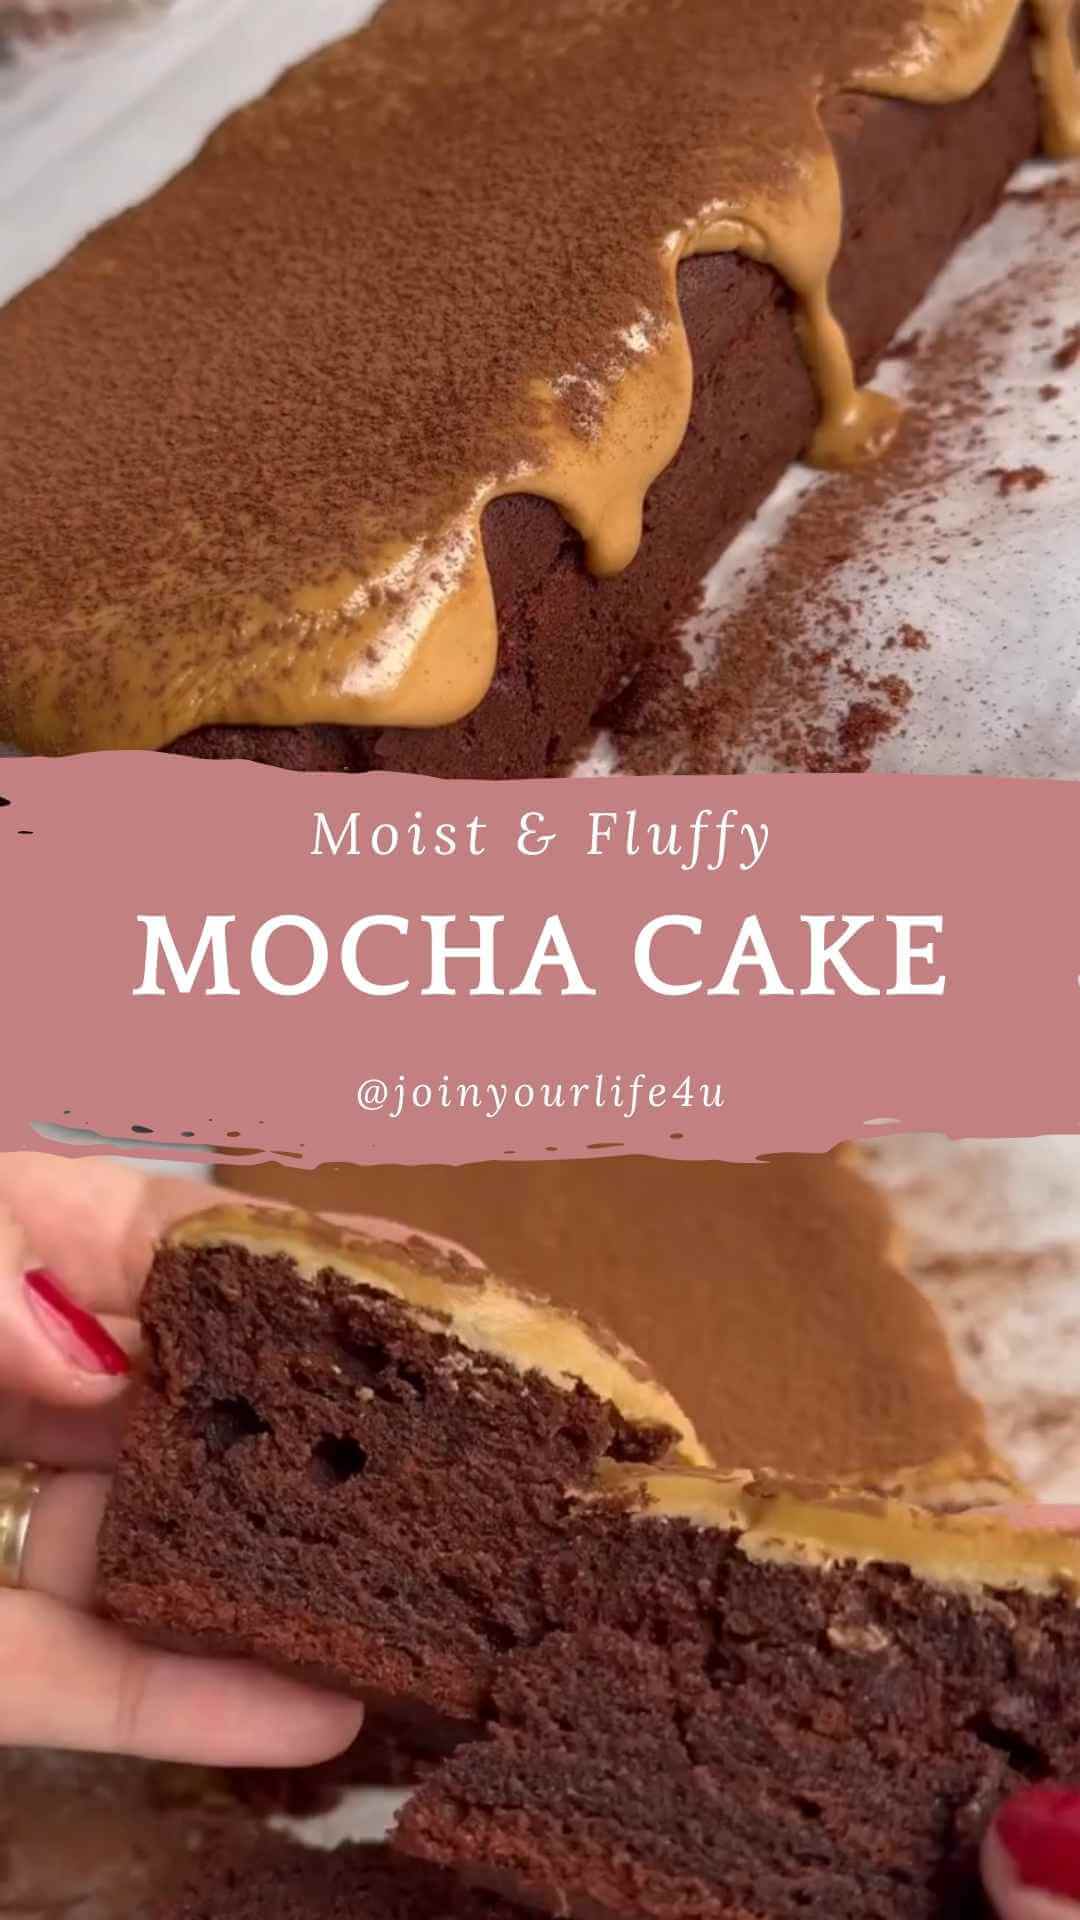 Mocha loaf cake with coffee icing - whole cake on display with a piece torn in two, revealing the moist interior